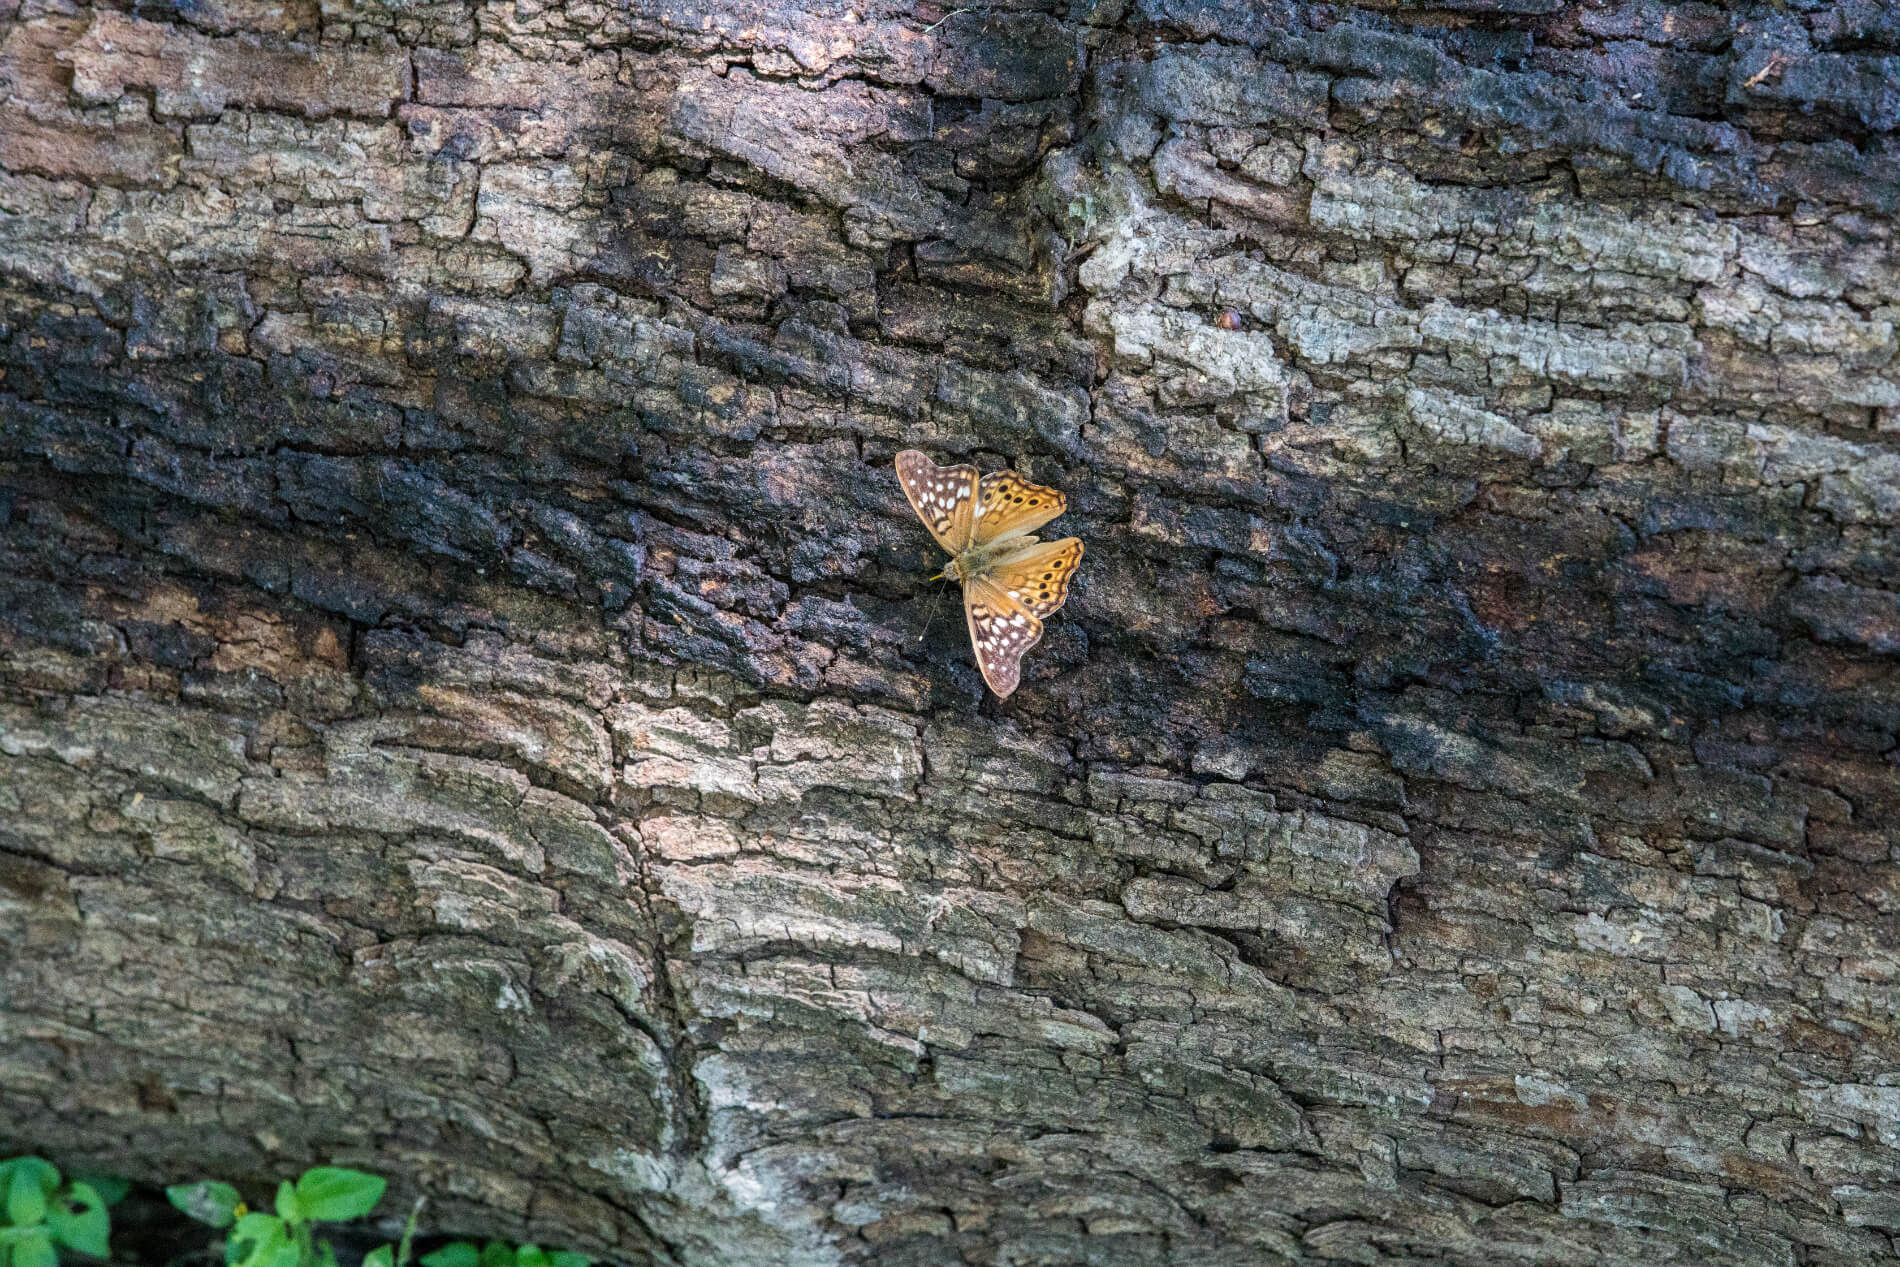 A Tawny Emperor on the grounds of the National Butterfly Center.